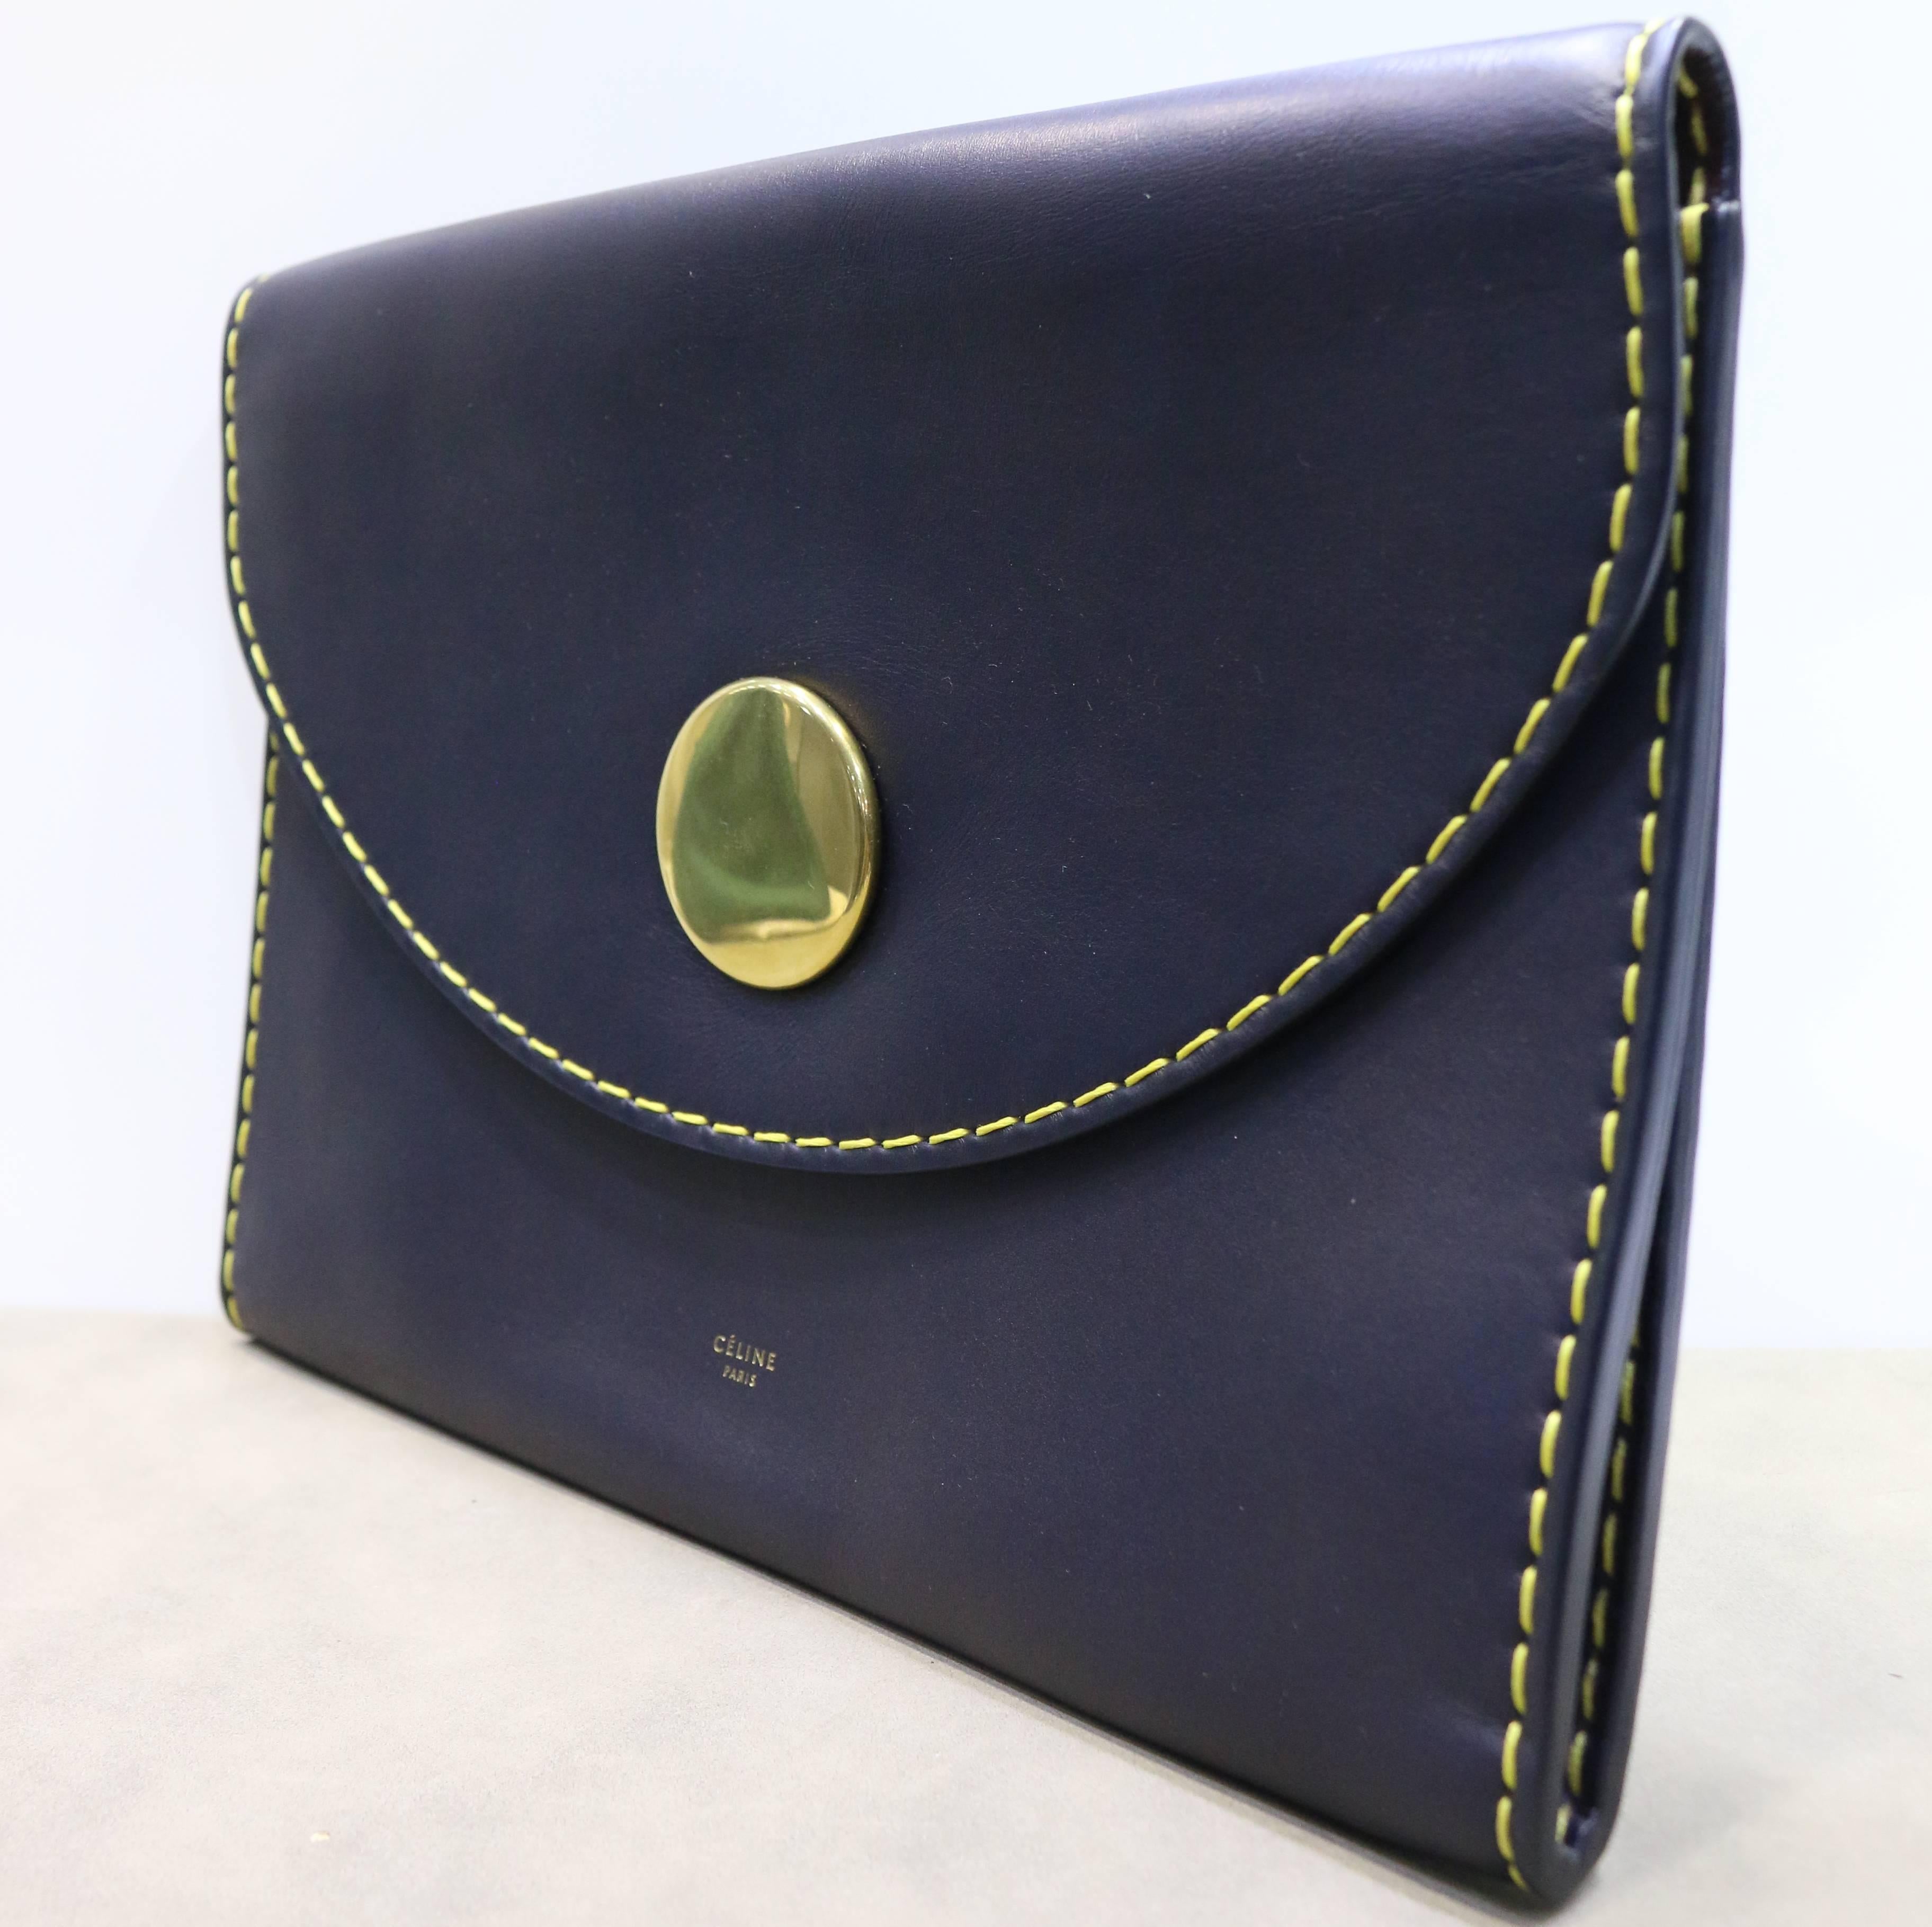 Black Celine Navy with Yellow Stitched Calfskin Leather Flap Clutch 